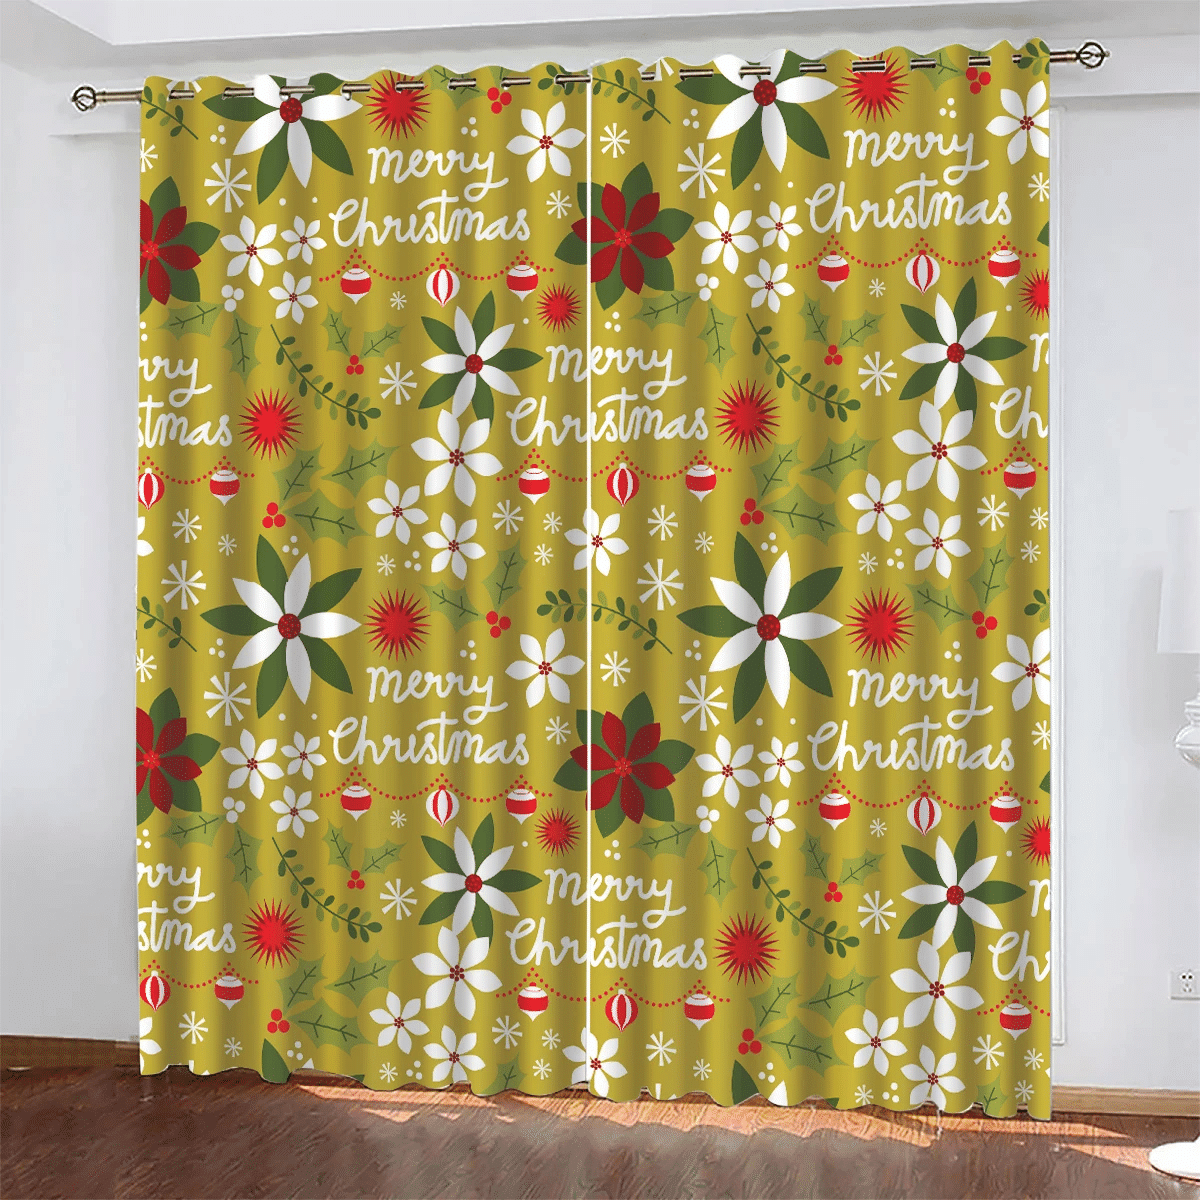 Hand Drawn Merry Christmas With Poinsettias And Lanterns Window Curtains Door Curtains Home Decor